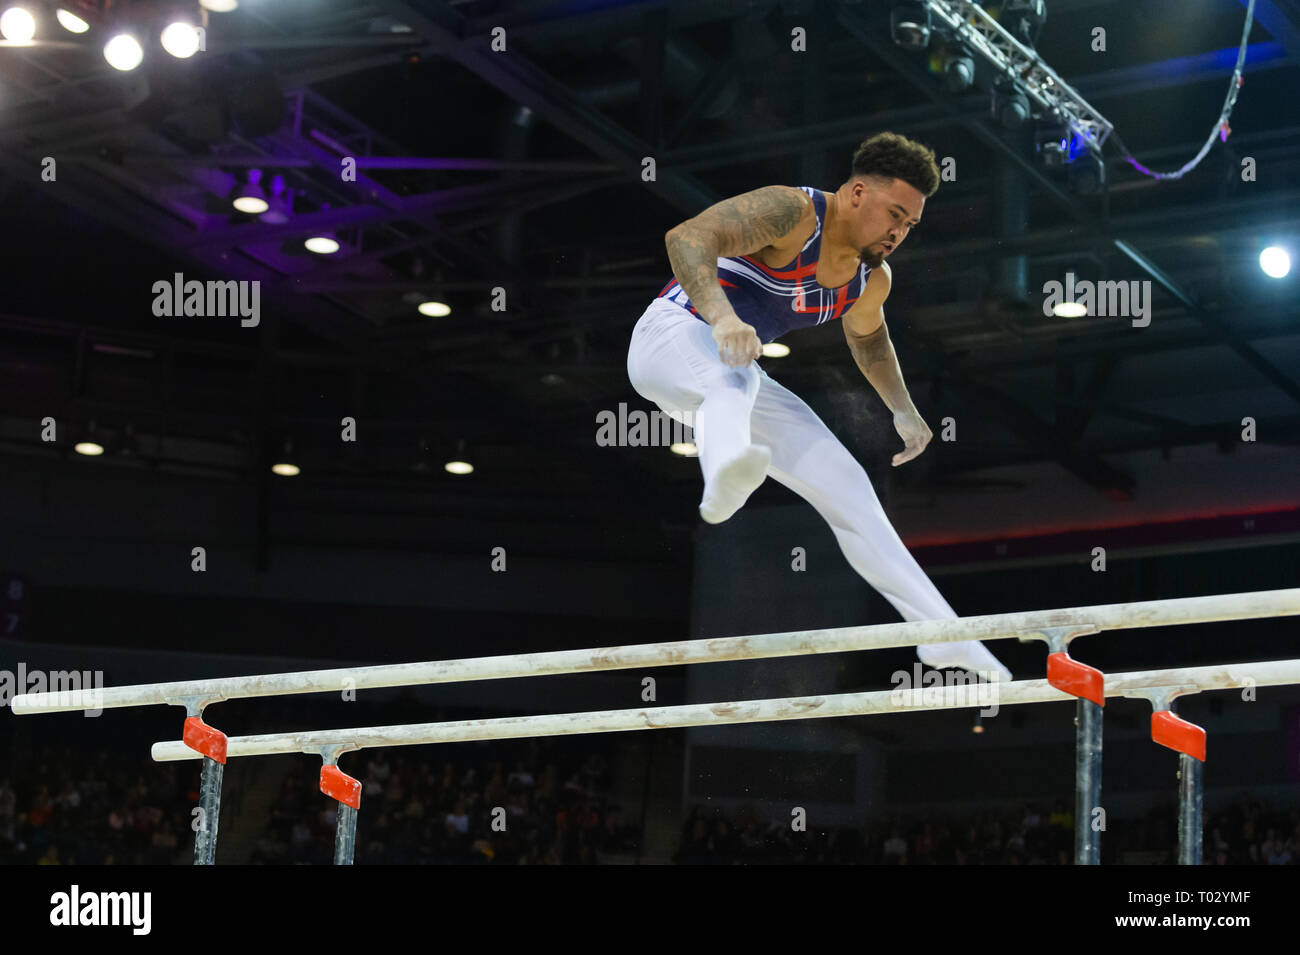 Liverpool, UK. 16th March 2019. Reiss Beckford of South Essex Gymnastics competing at the Men’s and Women’s Artistic British Championships 2019, M&S Bank Arena, Liverpool, UK. Credit: Iain Scott Photography/Alamy Live News Stock Photo